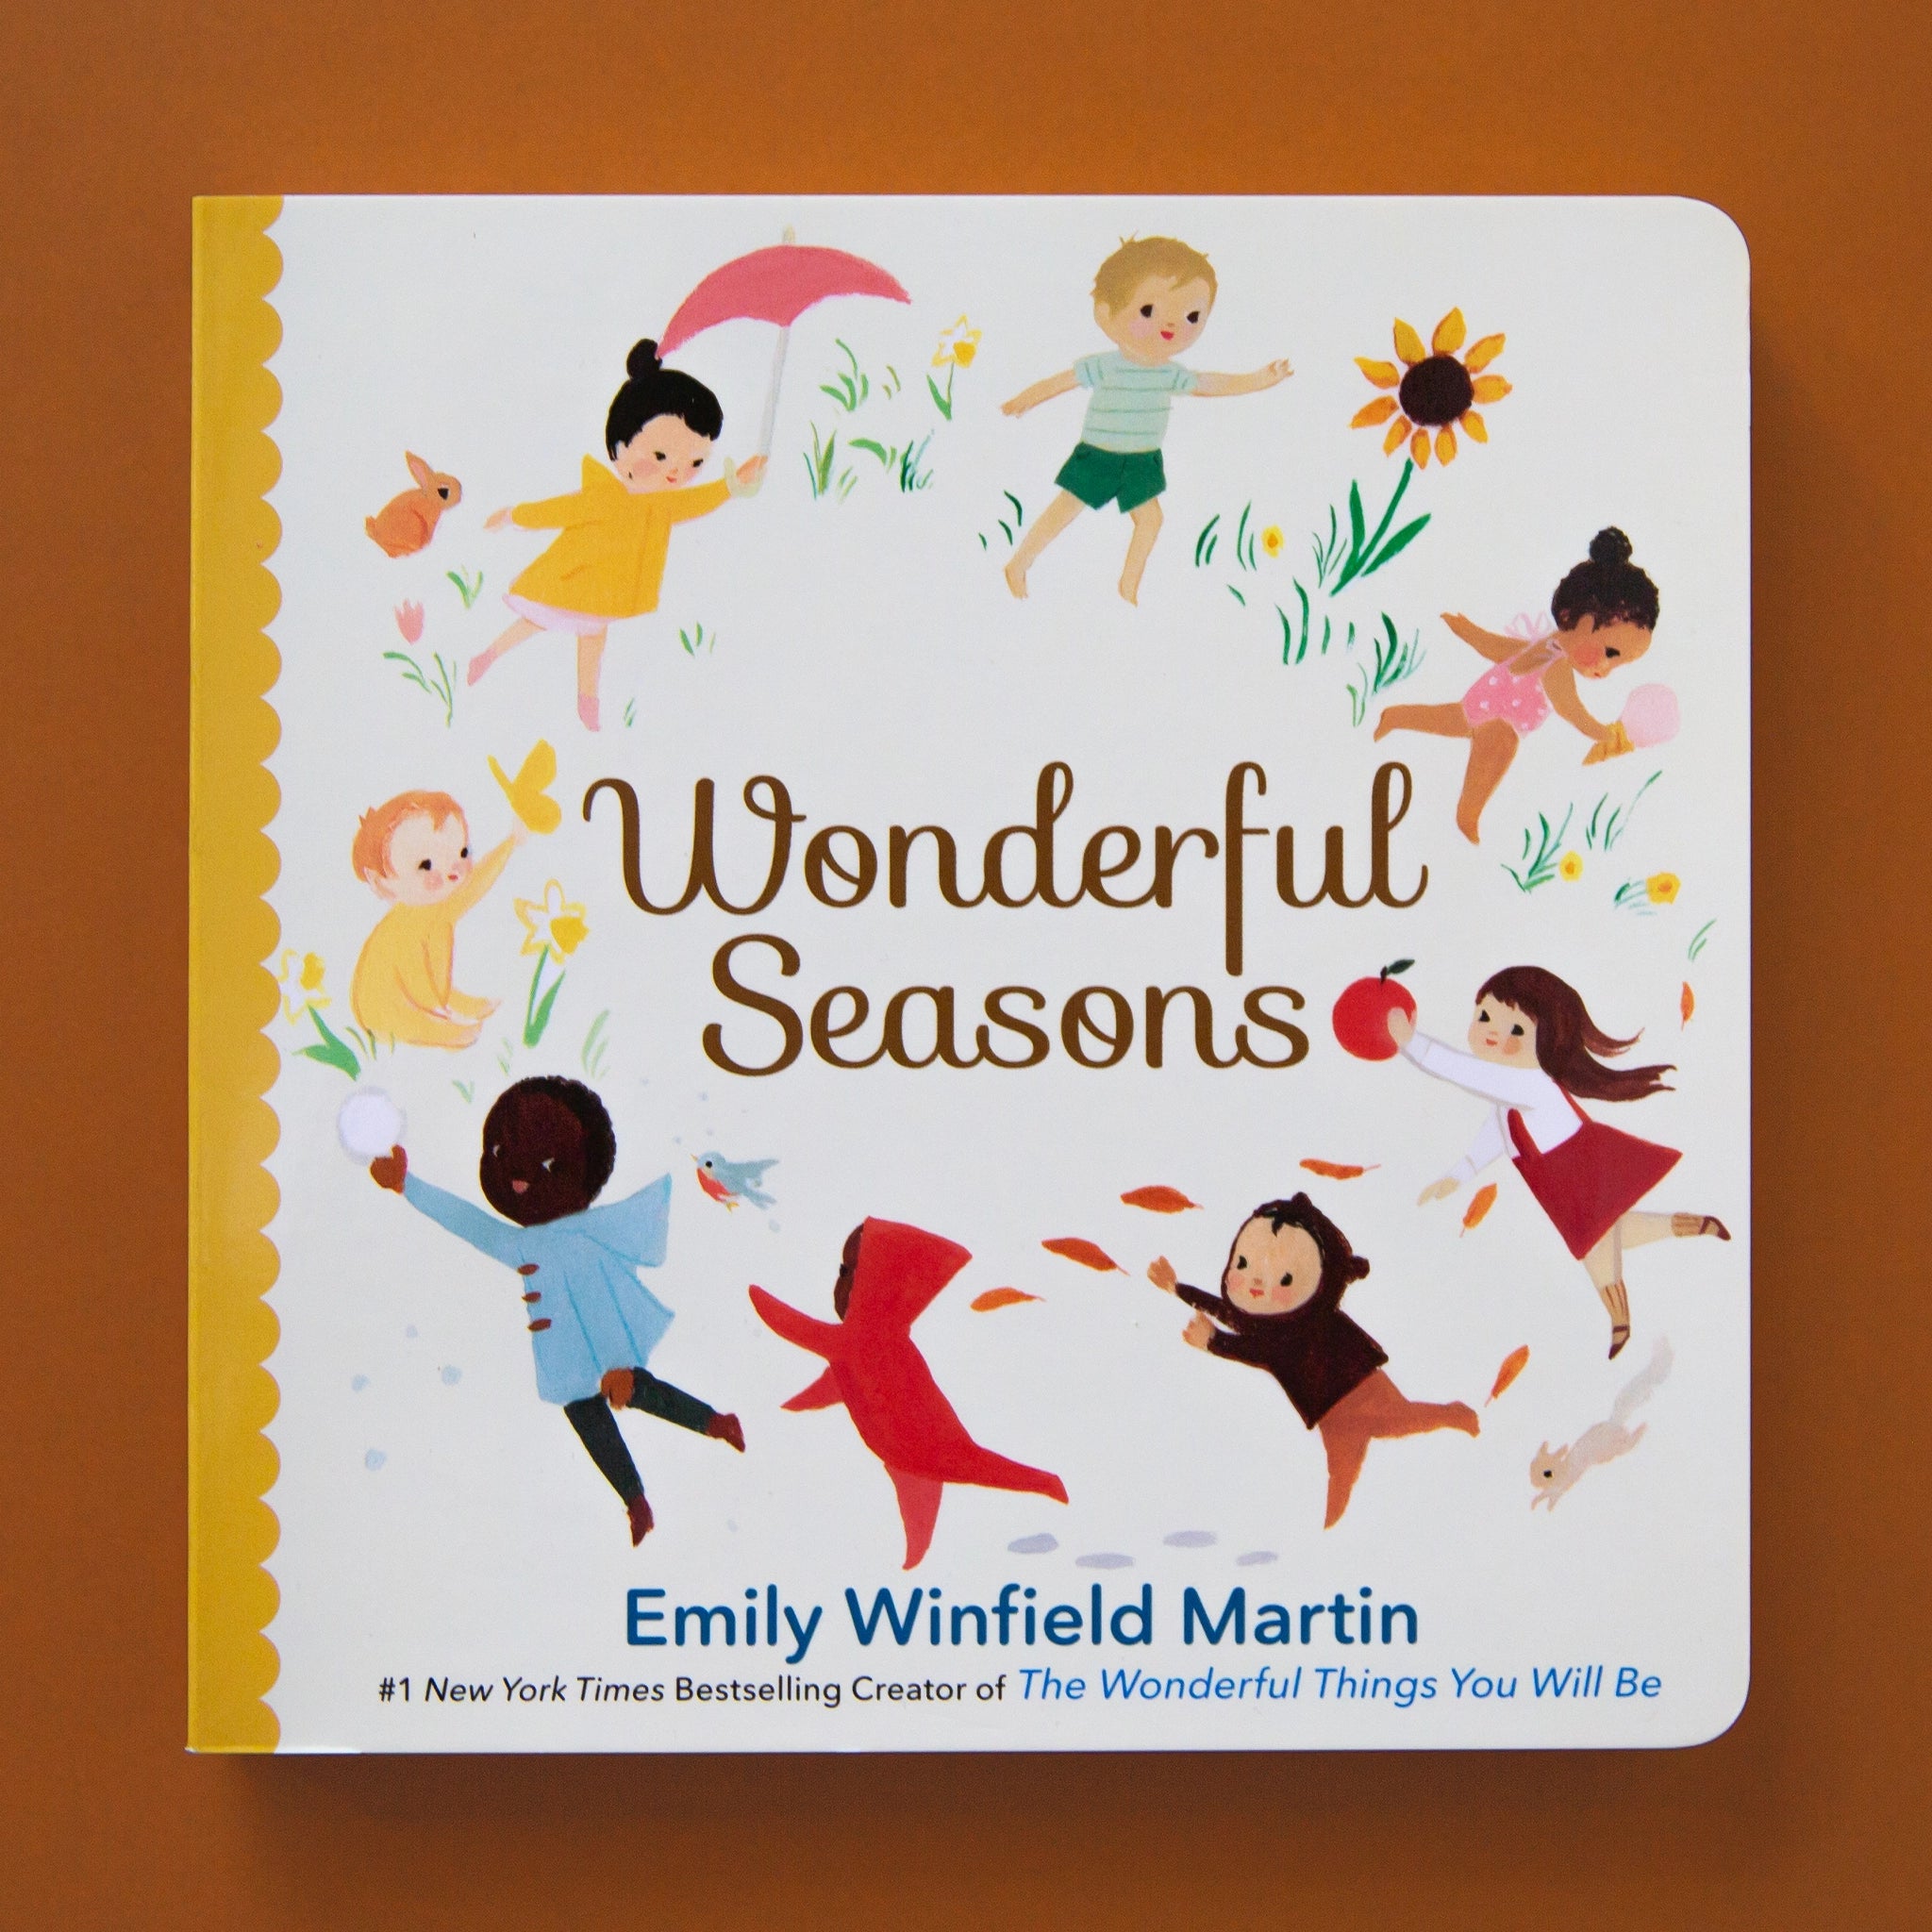 On a brown background is a white book cover with children in a circle around the book title that reads, "Wonderful Seasons" 